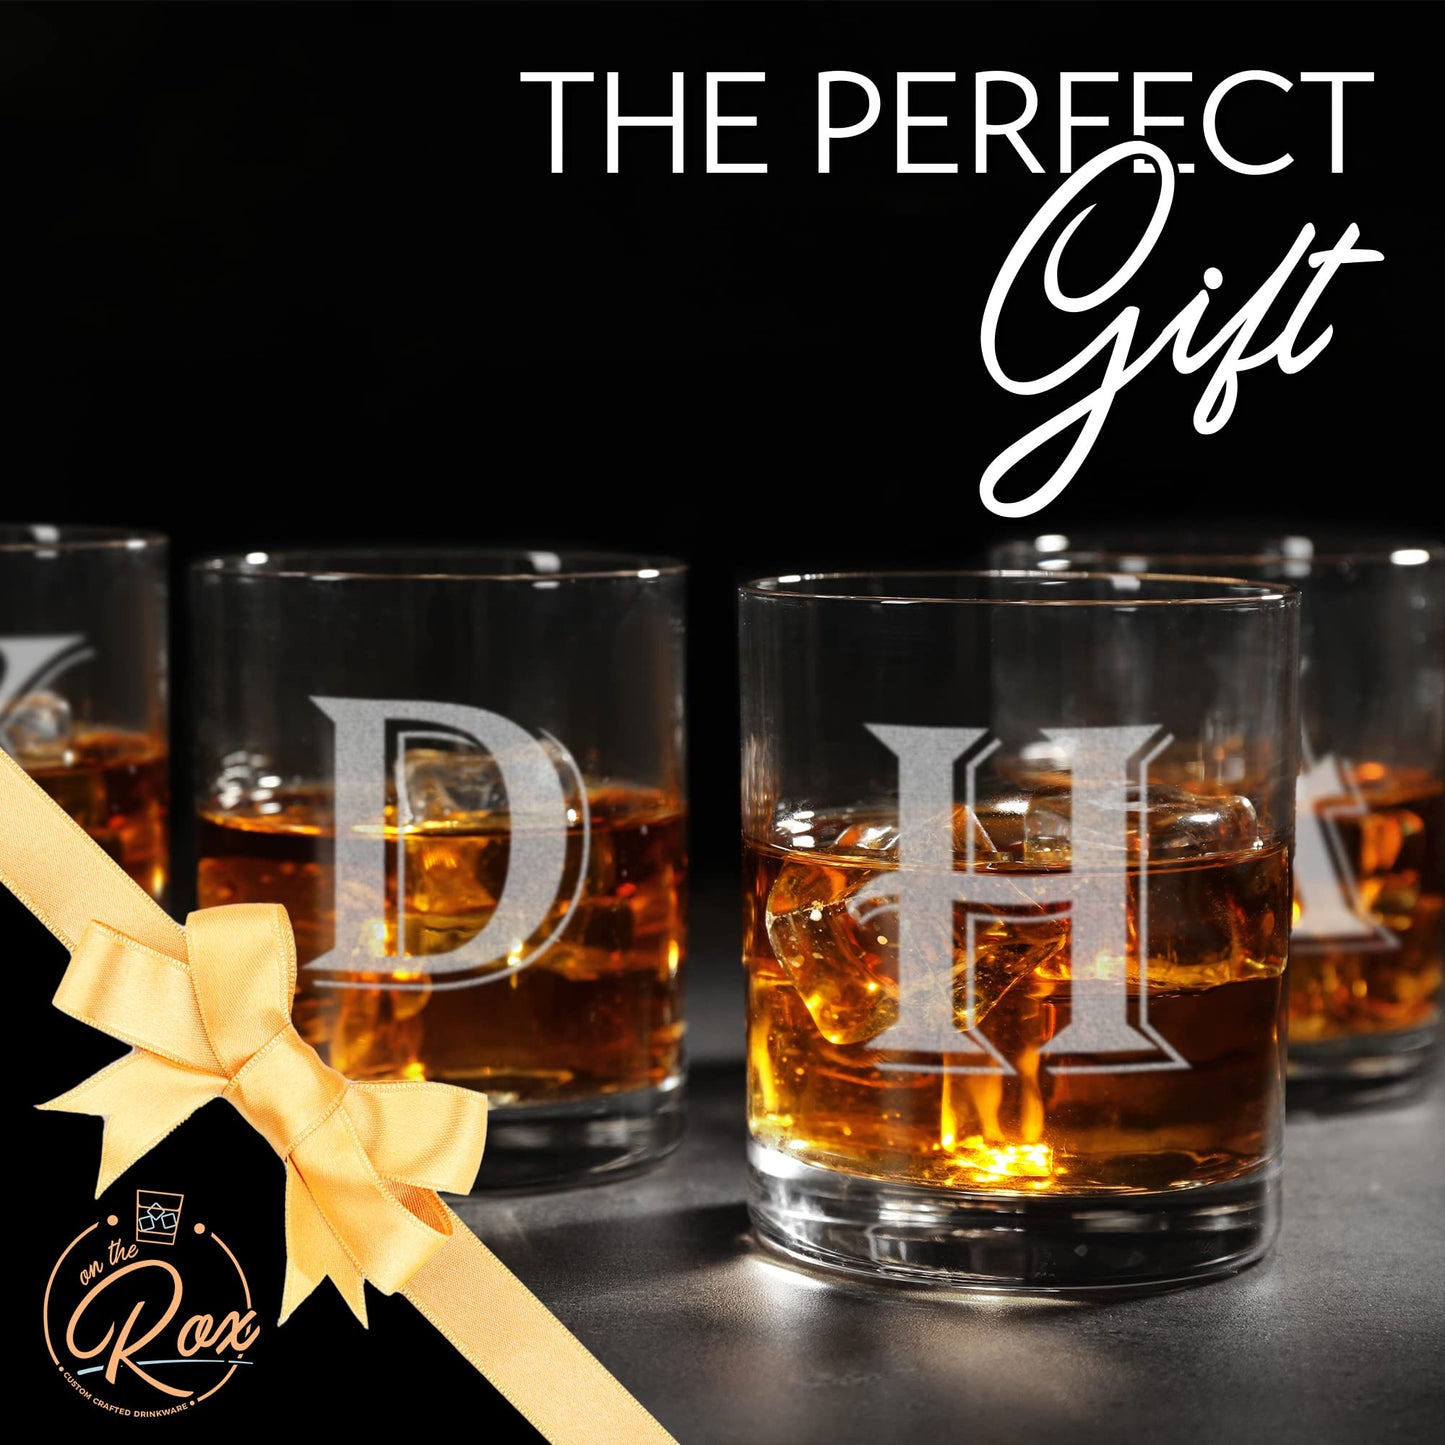 4 Piece Custom Engraved Set-Mix and Match Monogram Whiskey/Bourbon Glass Set- Choose Any Letter for Each Glass